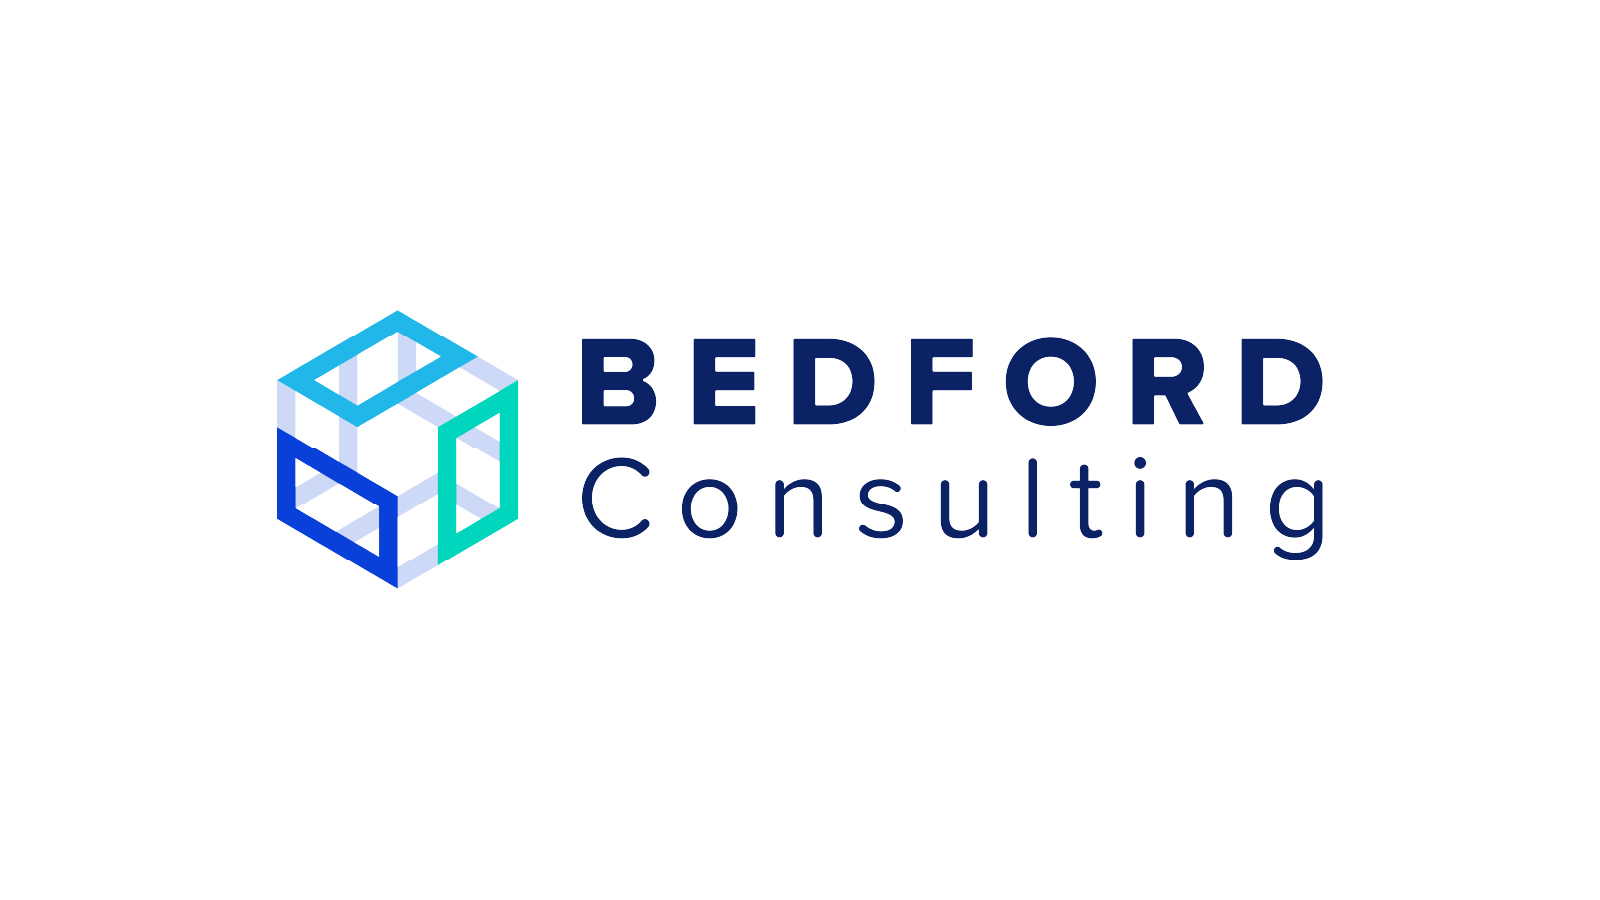 Bedford Consulting